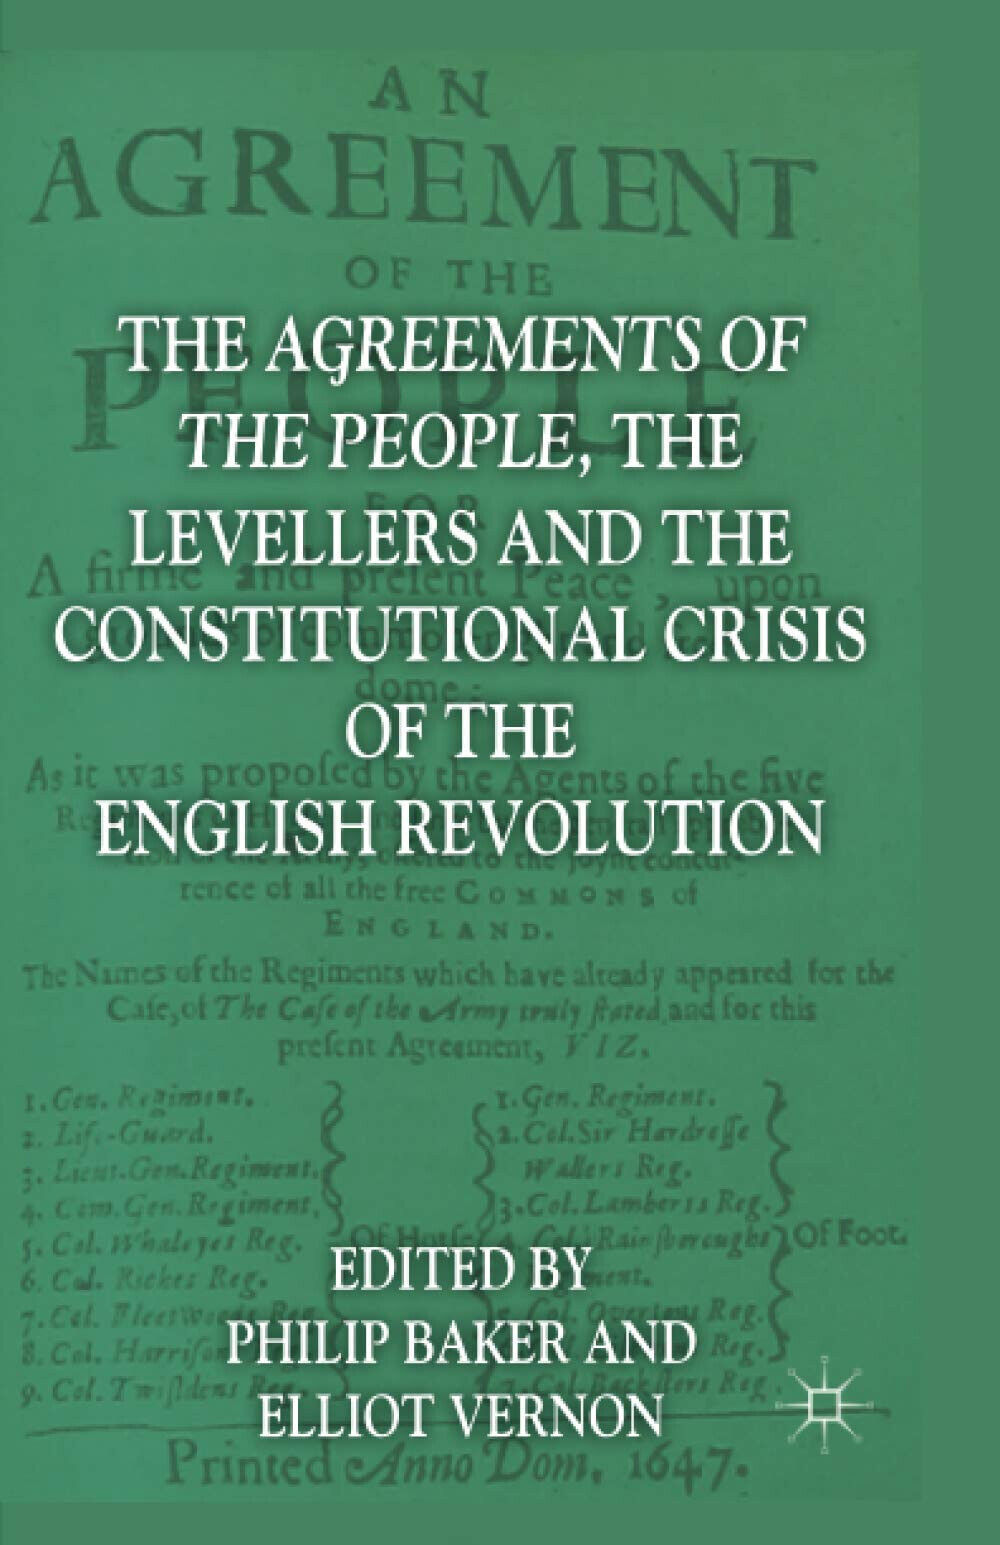 The Agreements of the People, the Levellers, and the Constitutional Crisis -2012